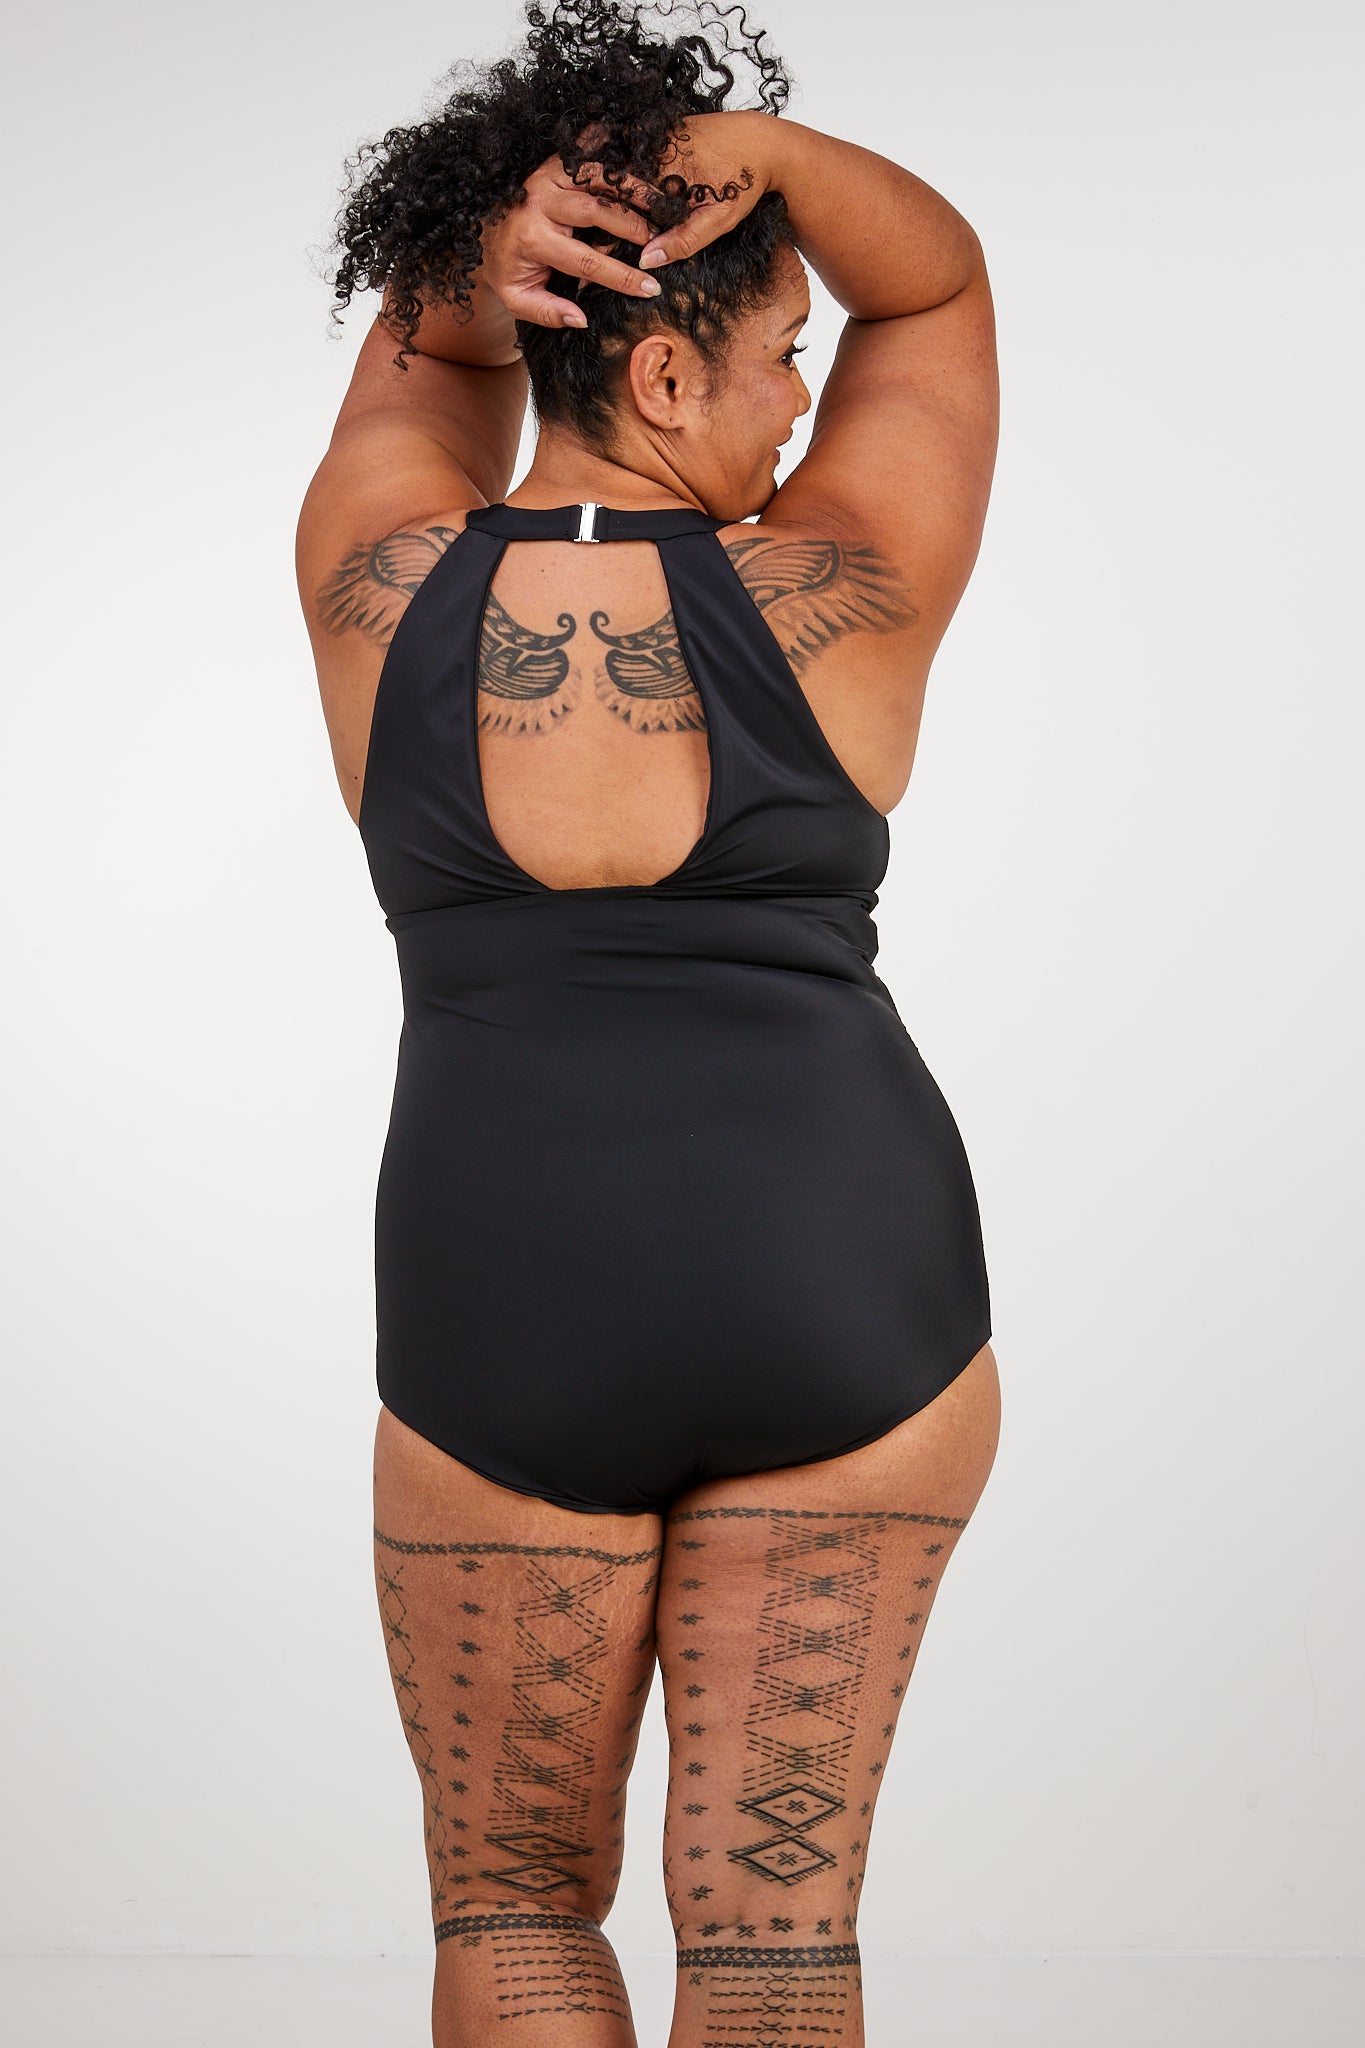 Curvy Swimwear Australia - The Mesh Tank one piece is a striking siwmsuit  every woman will love wearing this summer. This all black chlorine  resistant one piece swimsuit is made for those